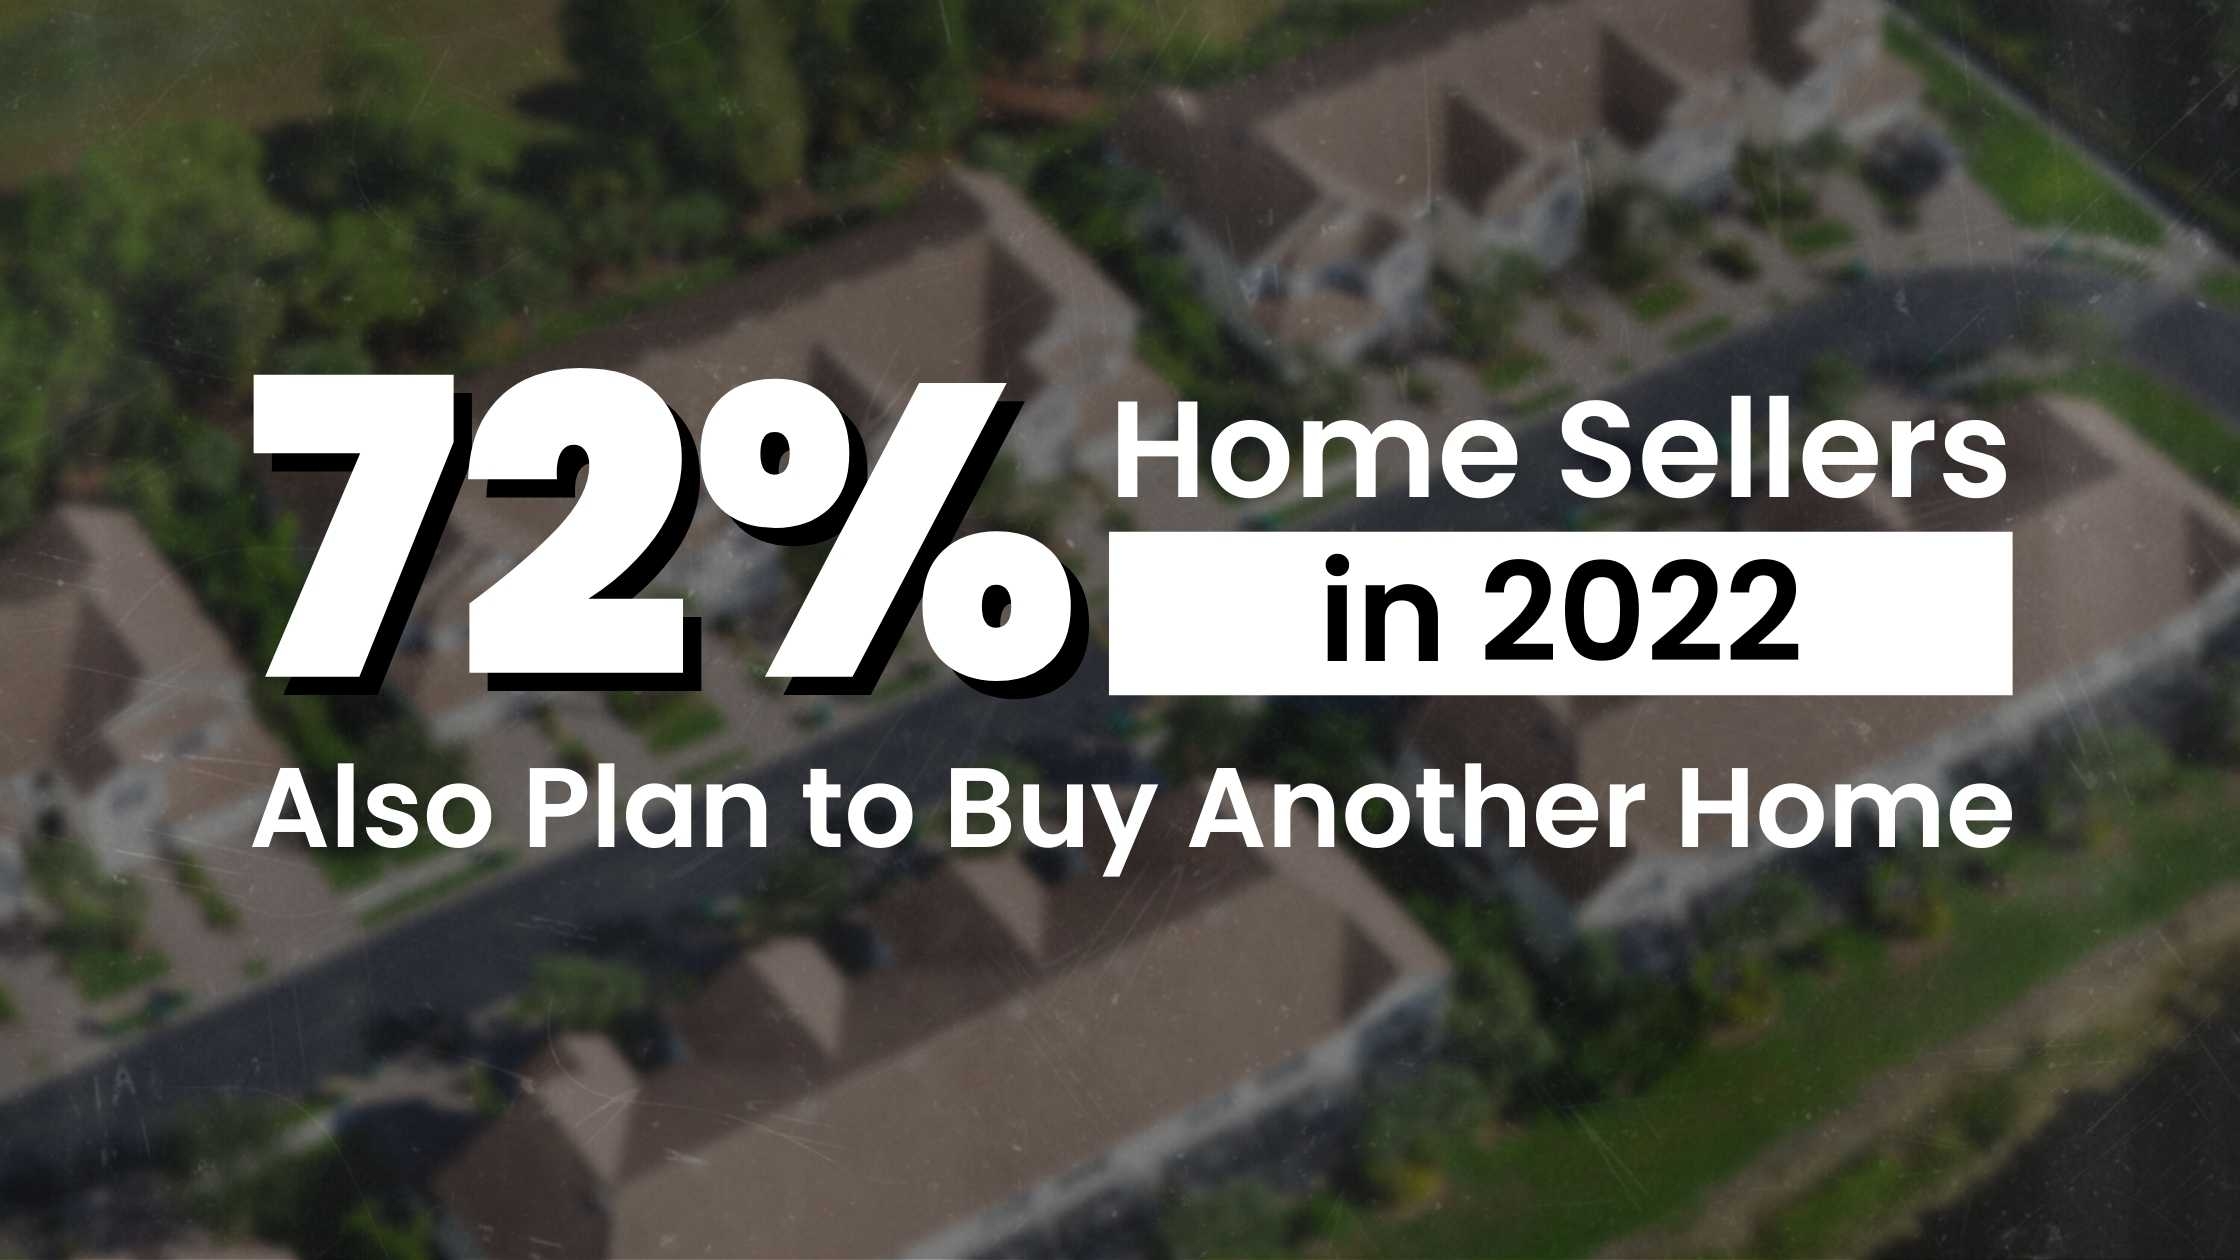 72% of Home Sellers in 2022 Also Plan to Buy Another Home in Orlando, FL